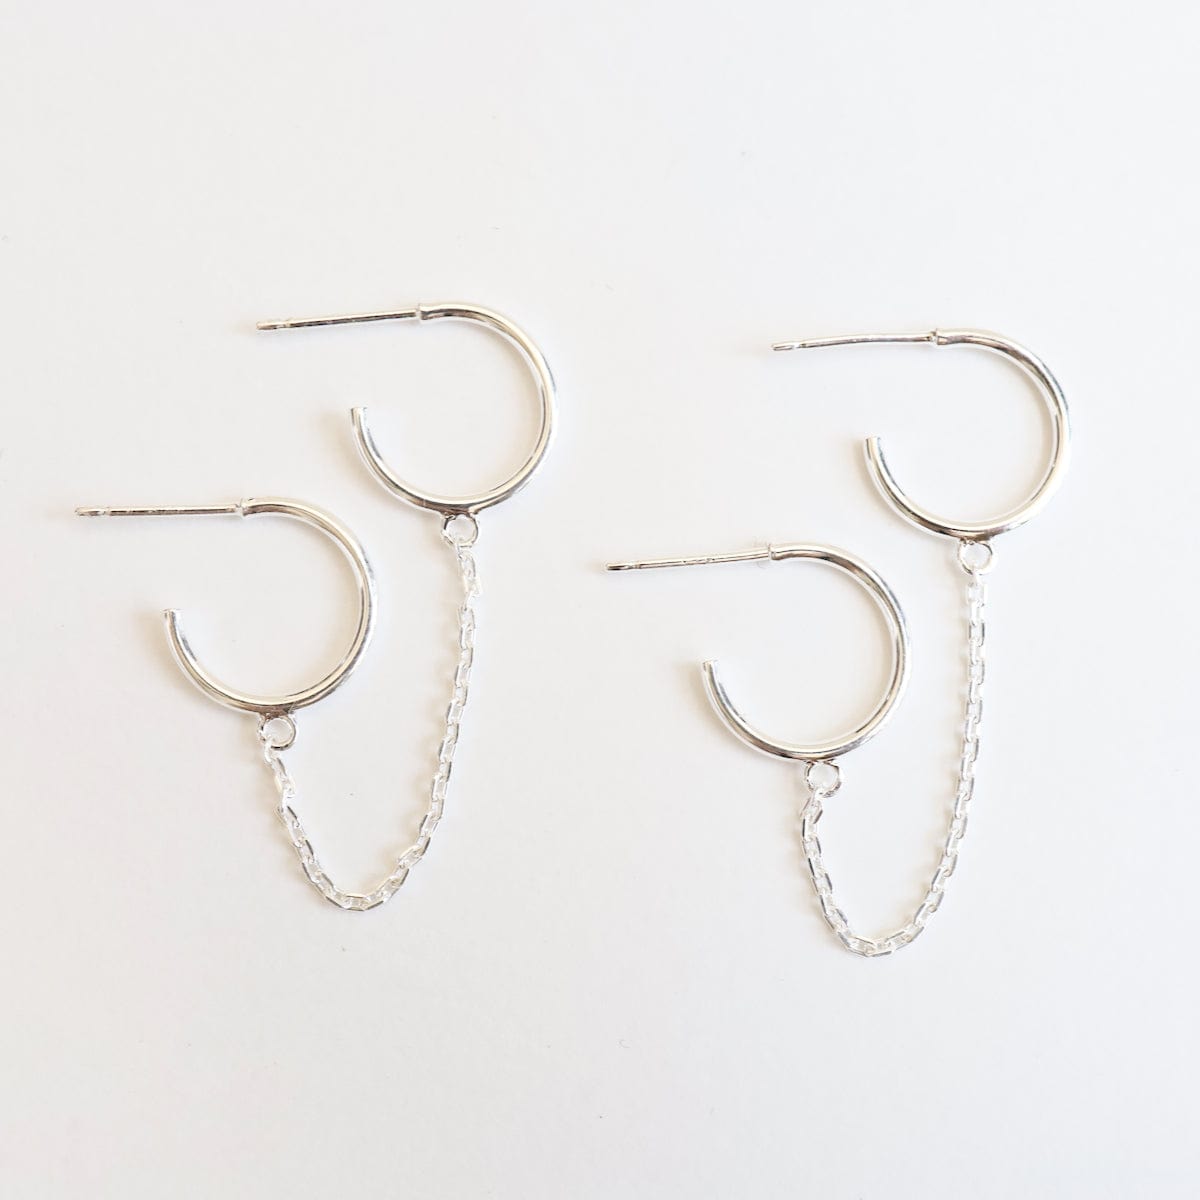 EAR Double Pierce Hoops with Chain - Sterling Silver